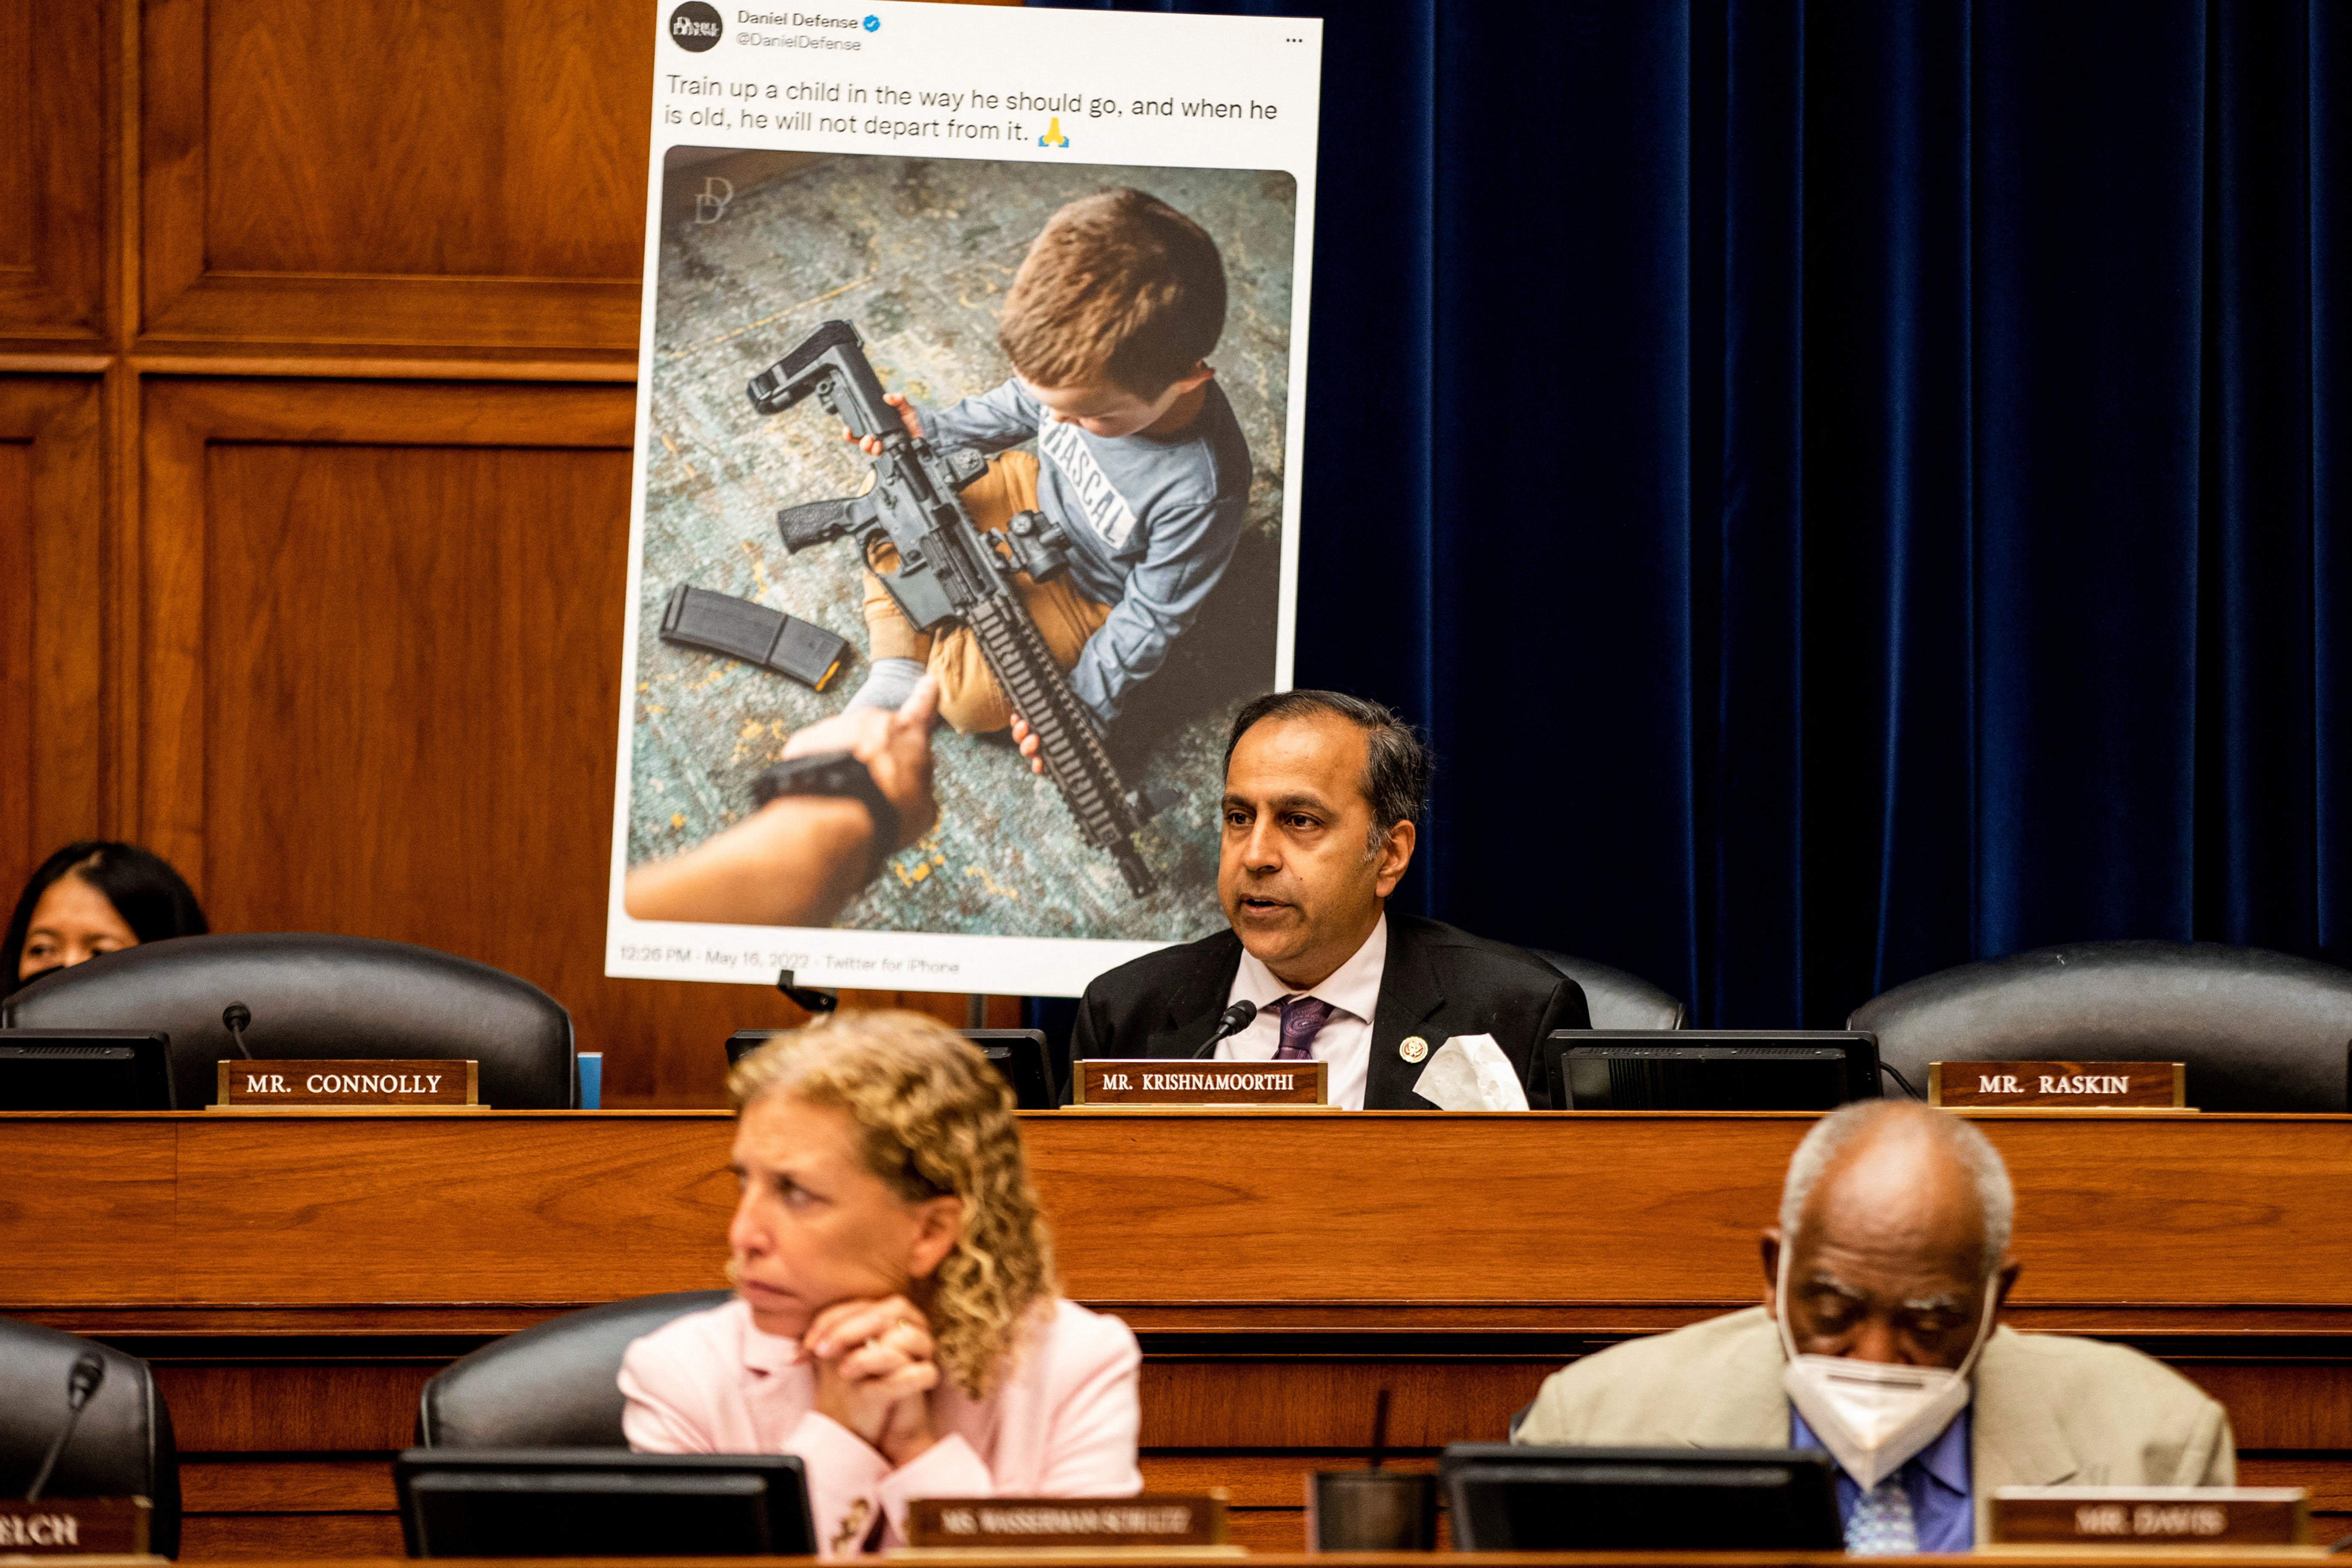 Representative Raja Krishnamoorthi (D-IL), speaks during a House Committee on Oversight and Reform hearing on gun violence on Capitol Hill in Washington, U.S. June 8, 2022